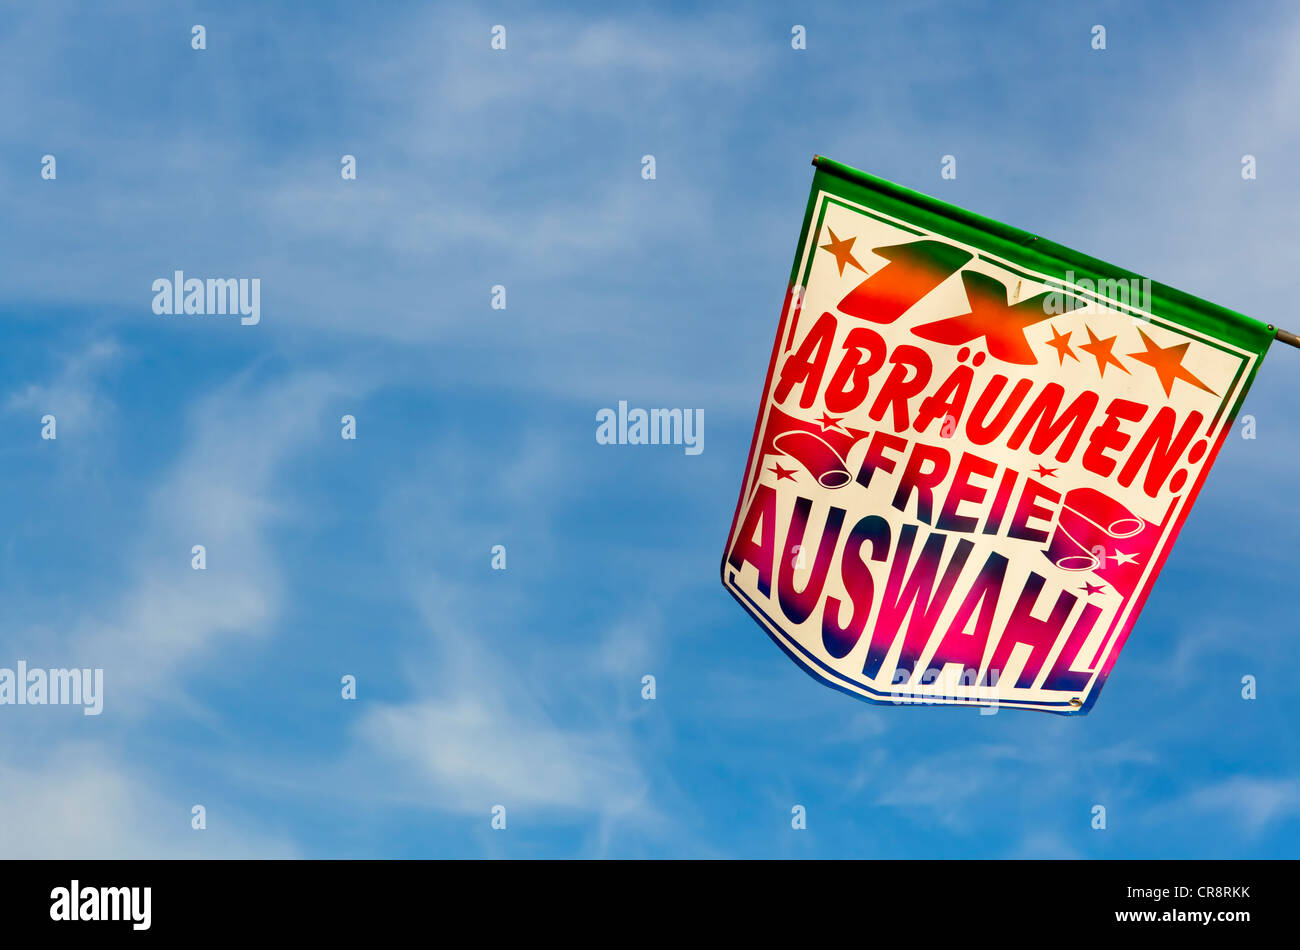 '1x abraeumen, freie Auswahl', German for 'clear all, free selection' on a fairground, banner against a blue sky, Stock Photo